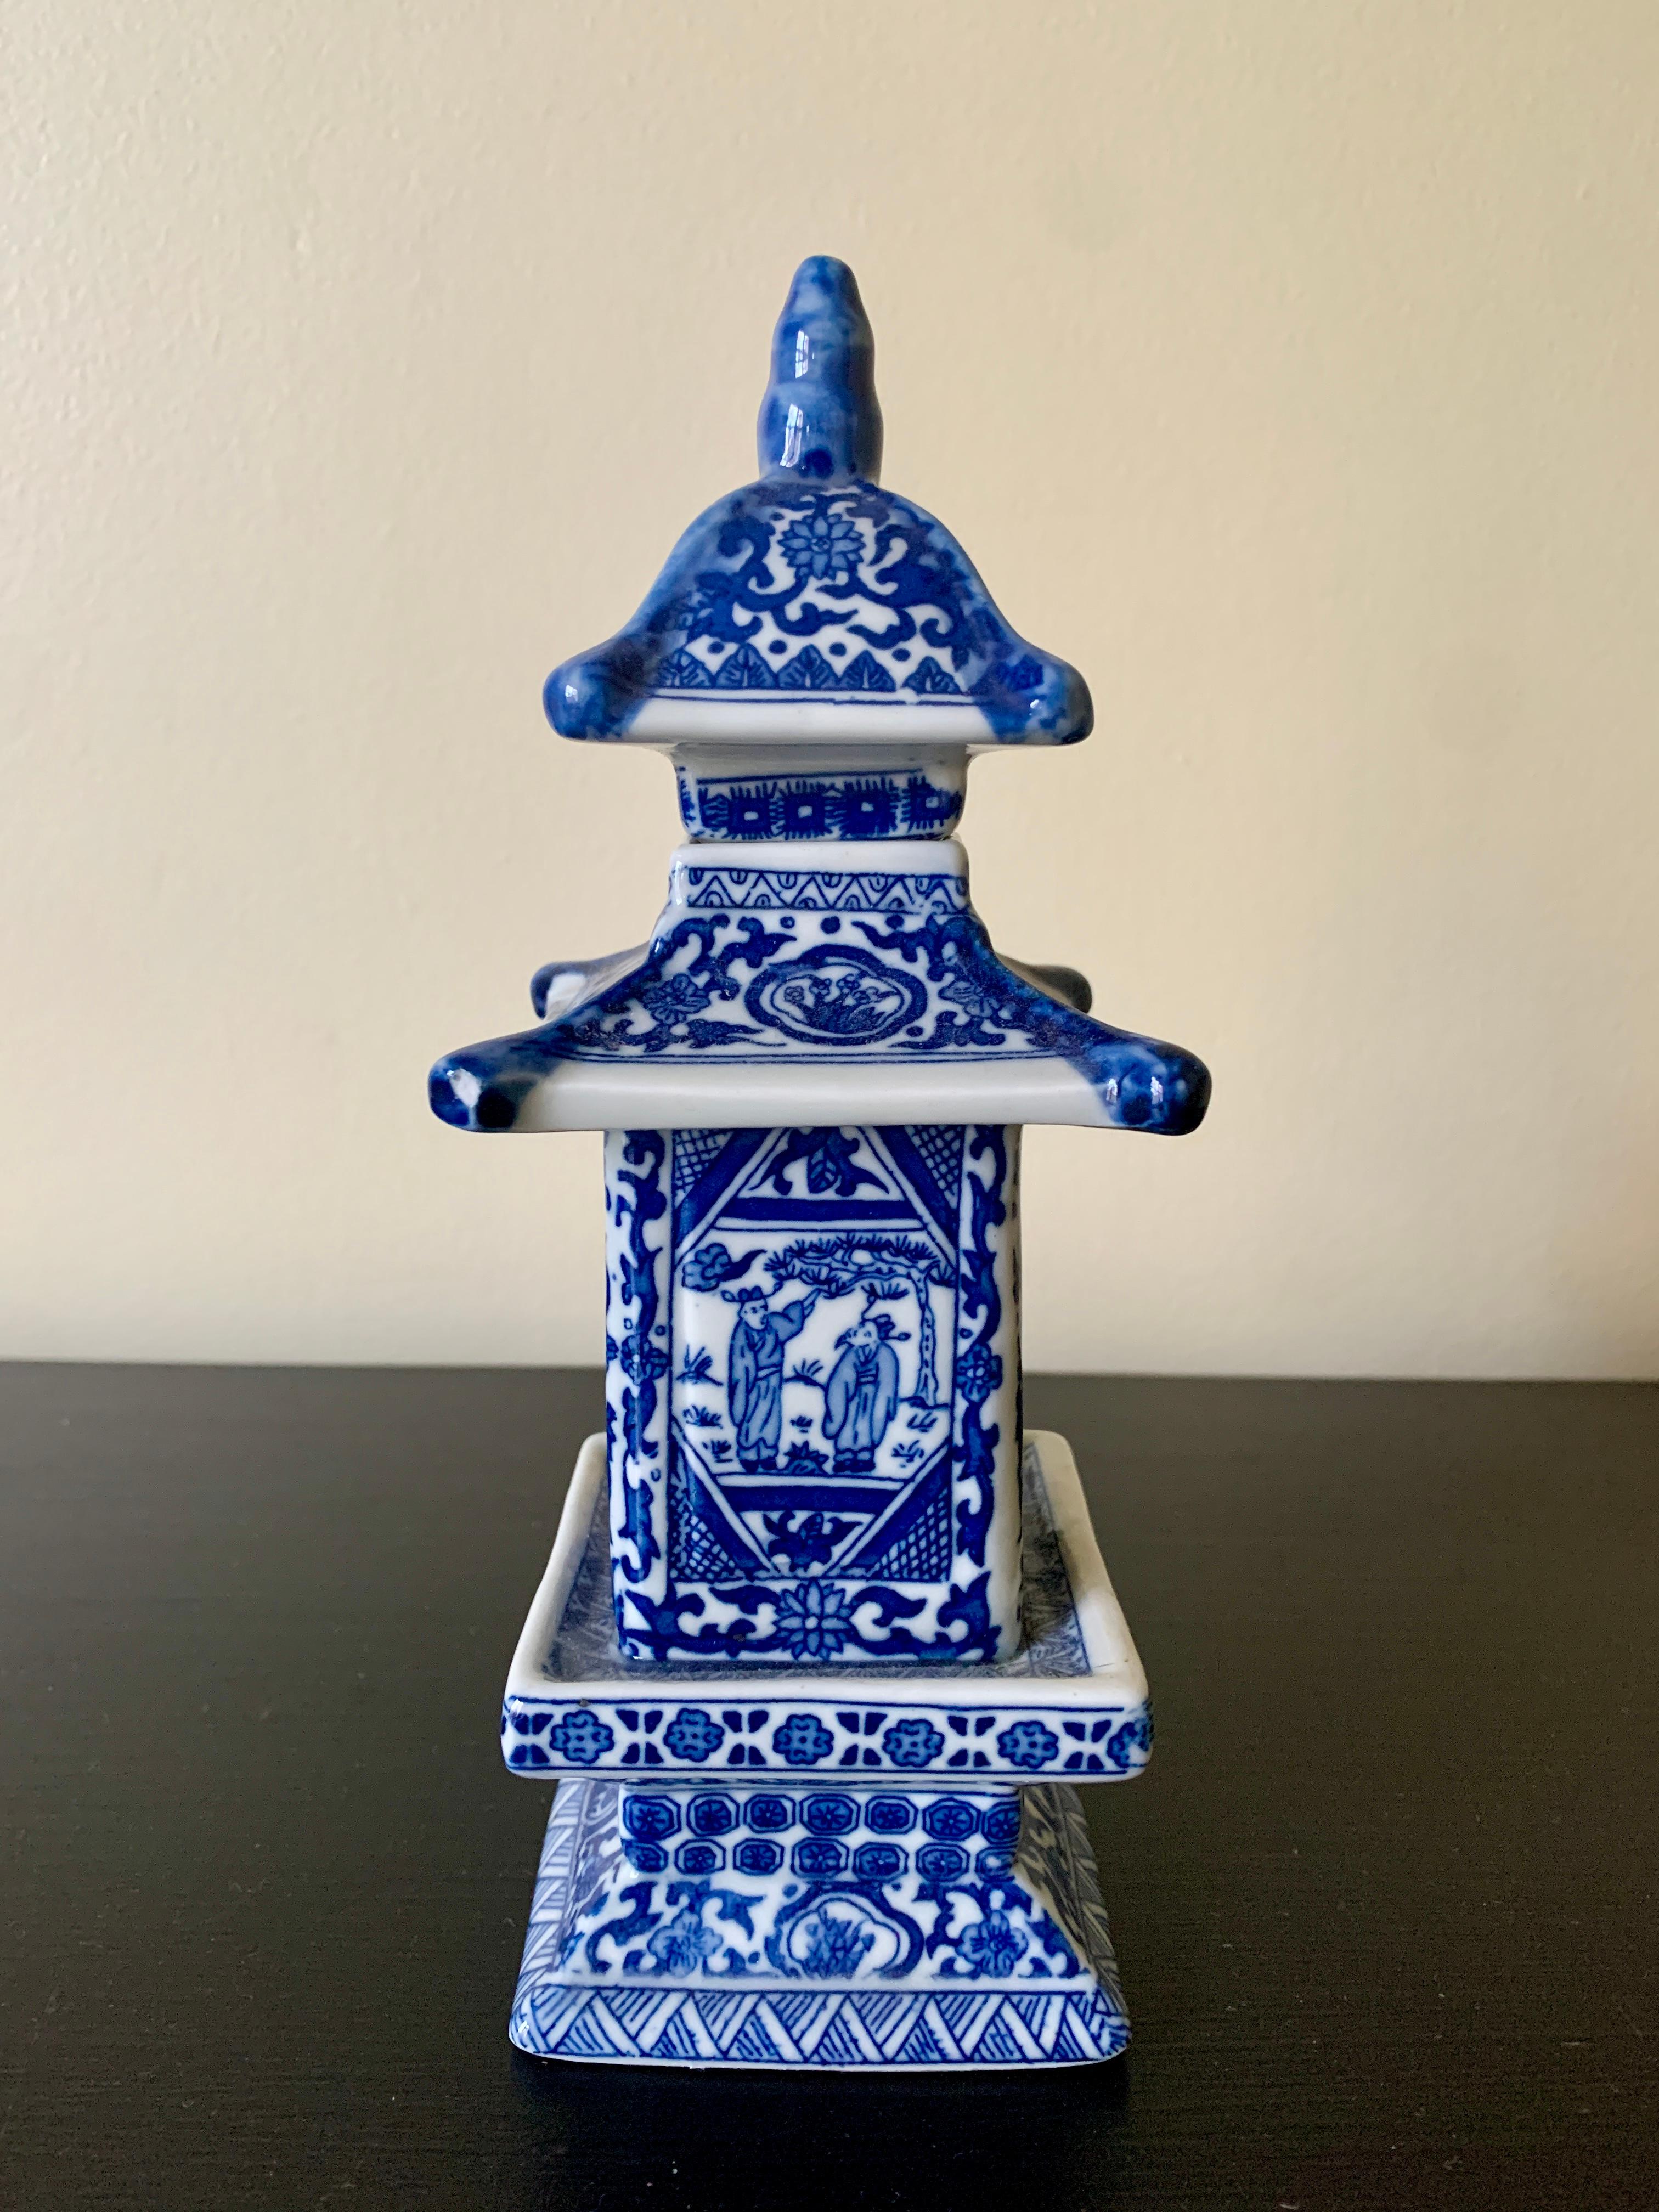 A gorgeous Chinoiserie blue and white porcelain pagoda jar with removable top.

China, Early 21st Century

Measures: 2.75